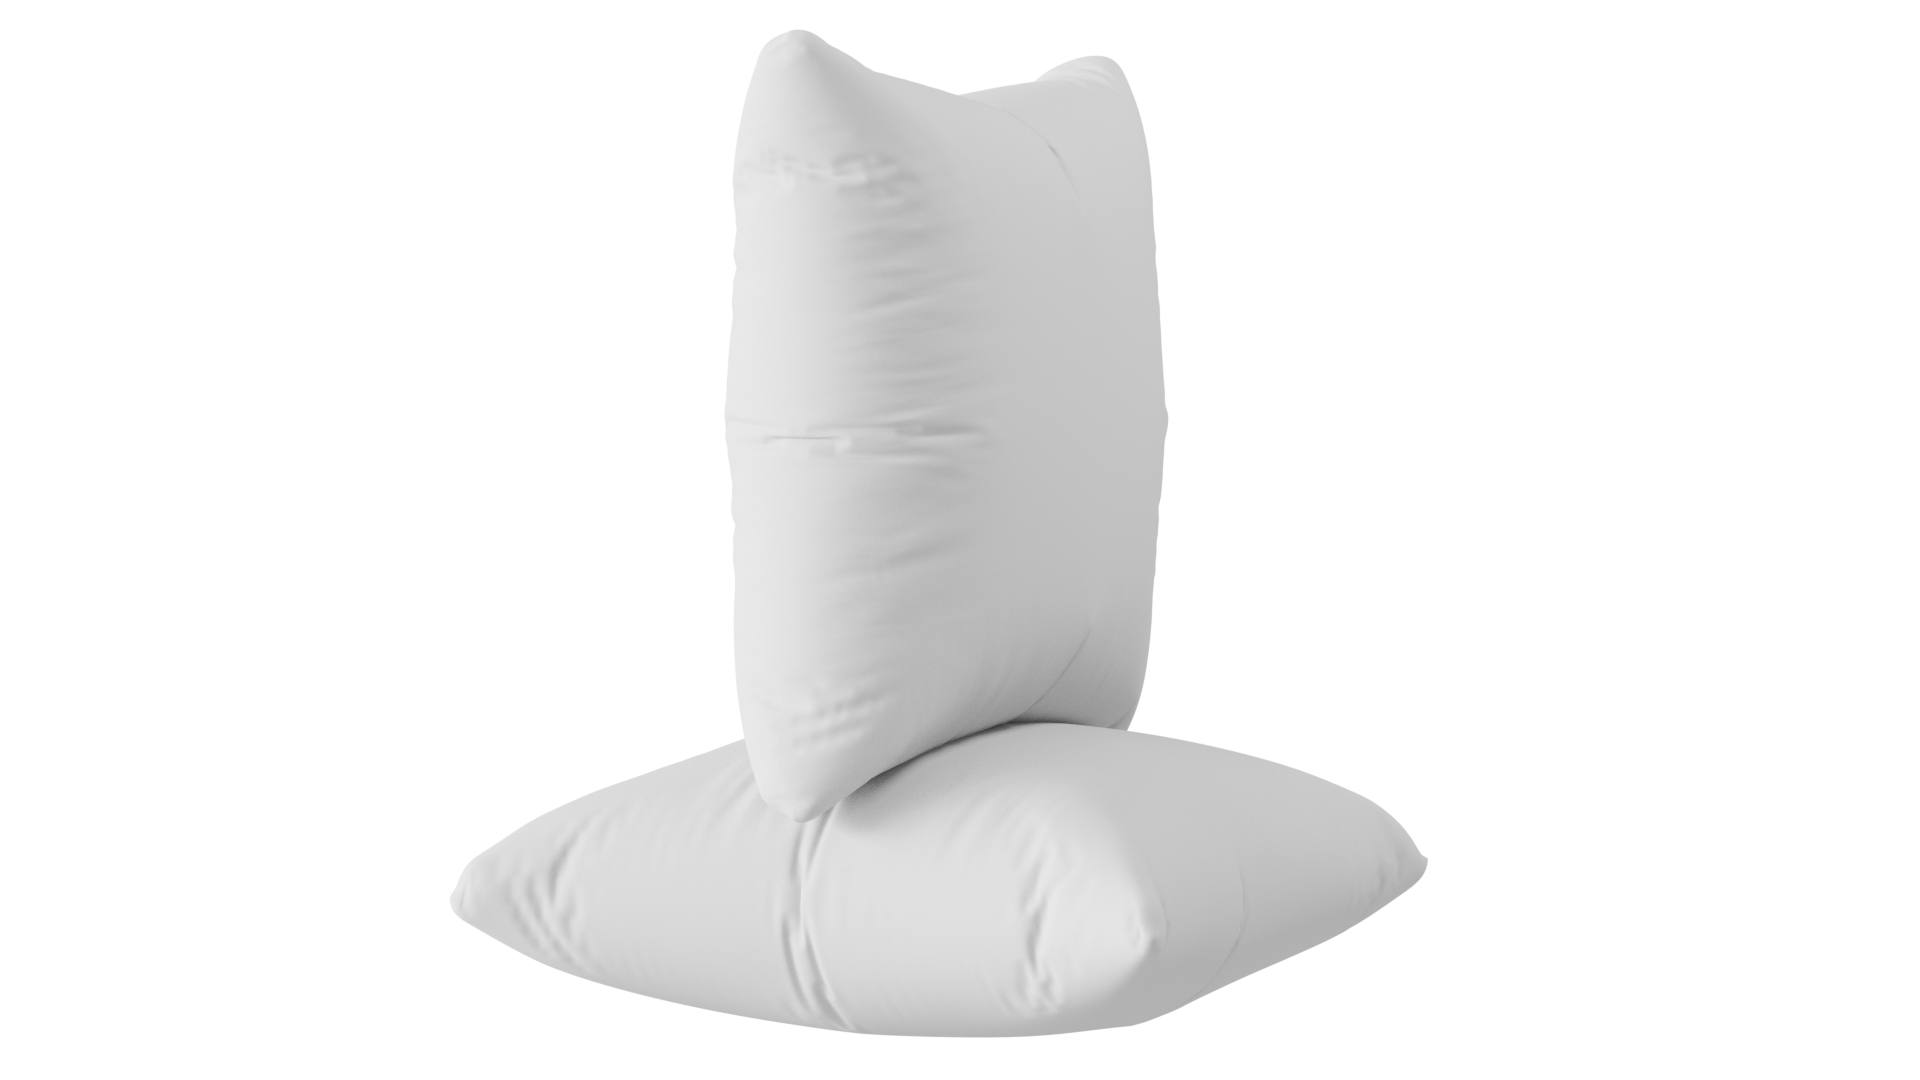 Utopia Bedding Throw Pillows Insert (Pack of 2, White) - 18 x 18 Inche –  foxberryparkproducts